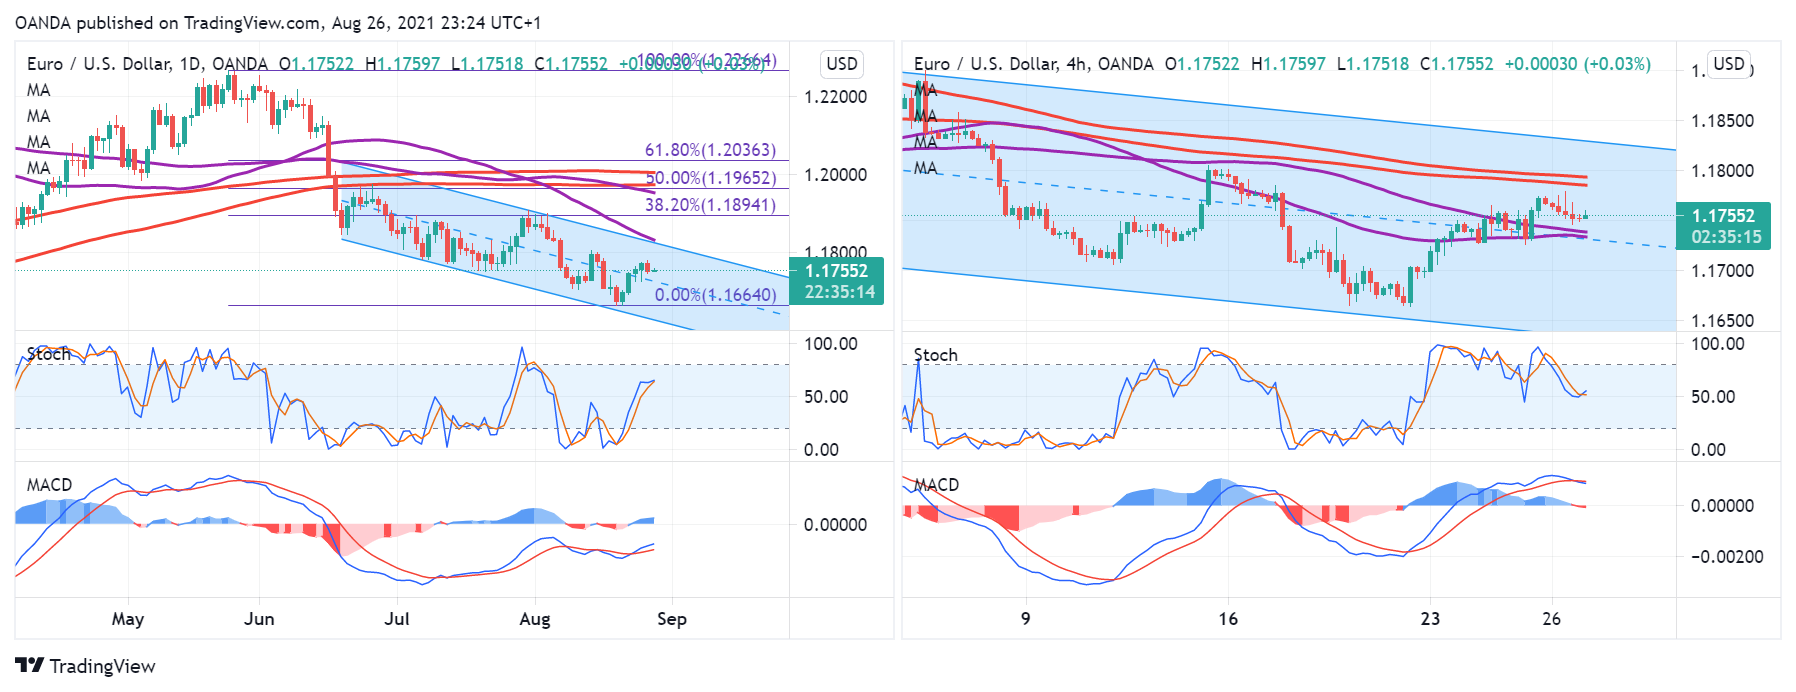 EUR/USD Daily And 4-Hr Charts